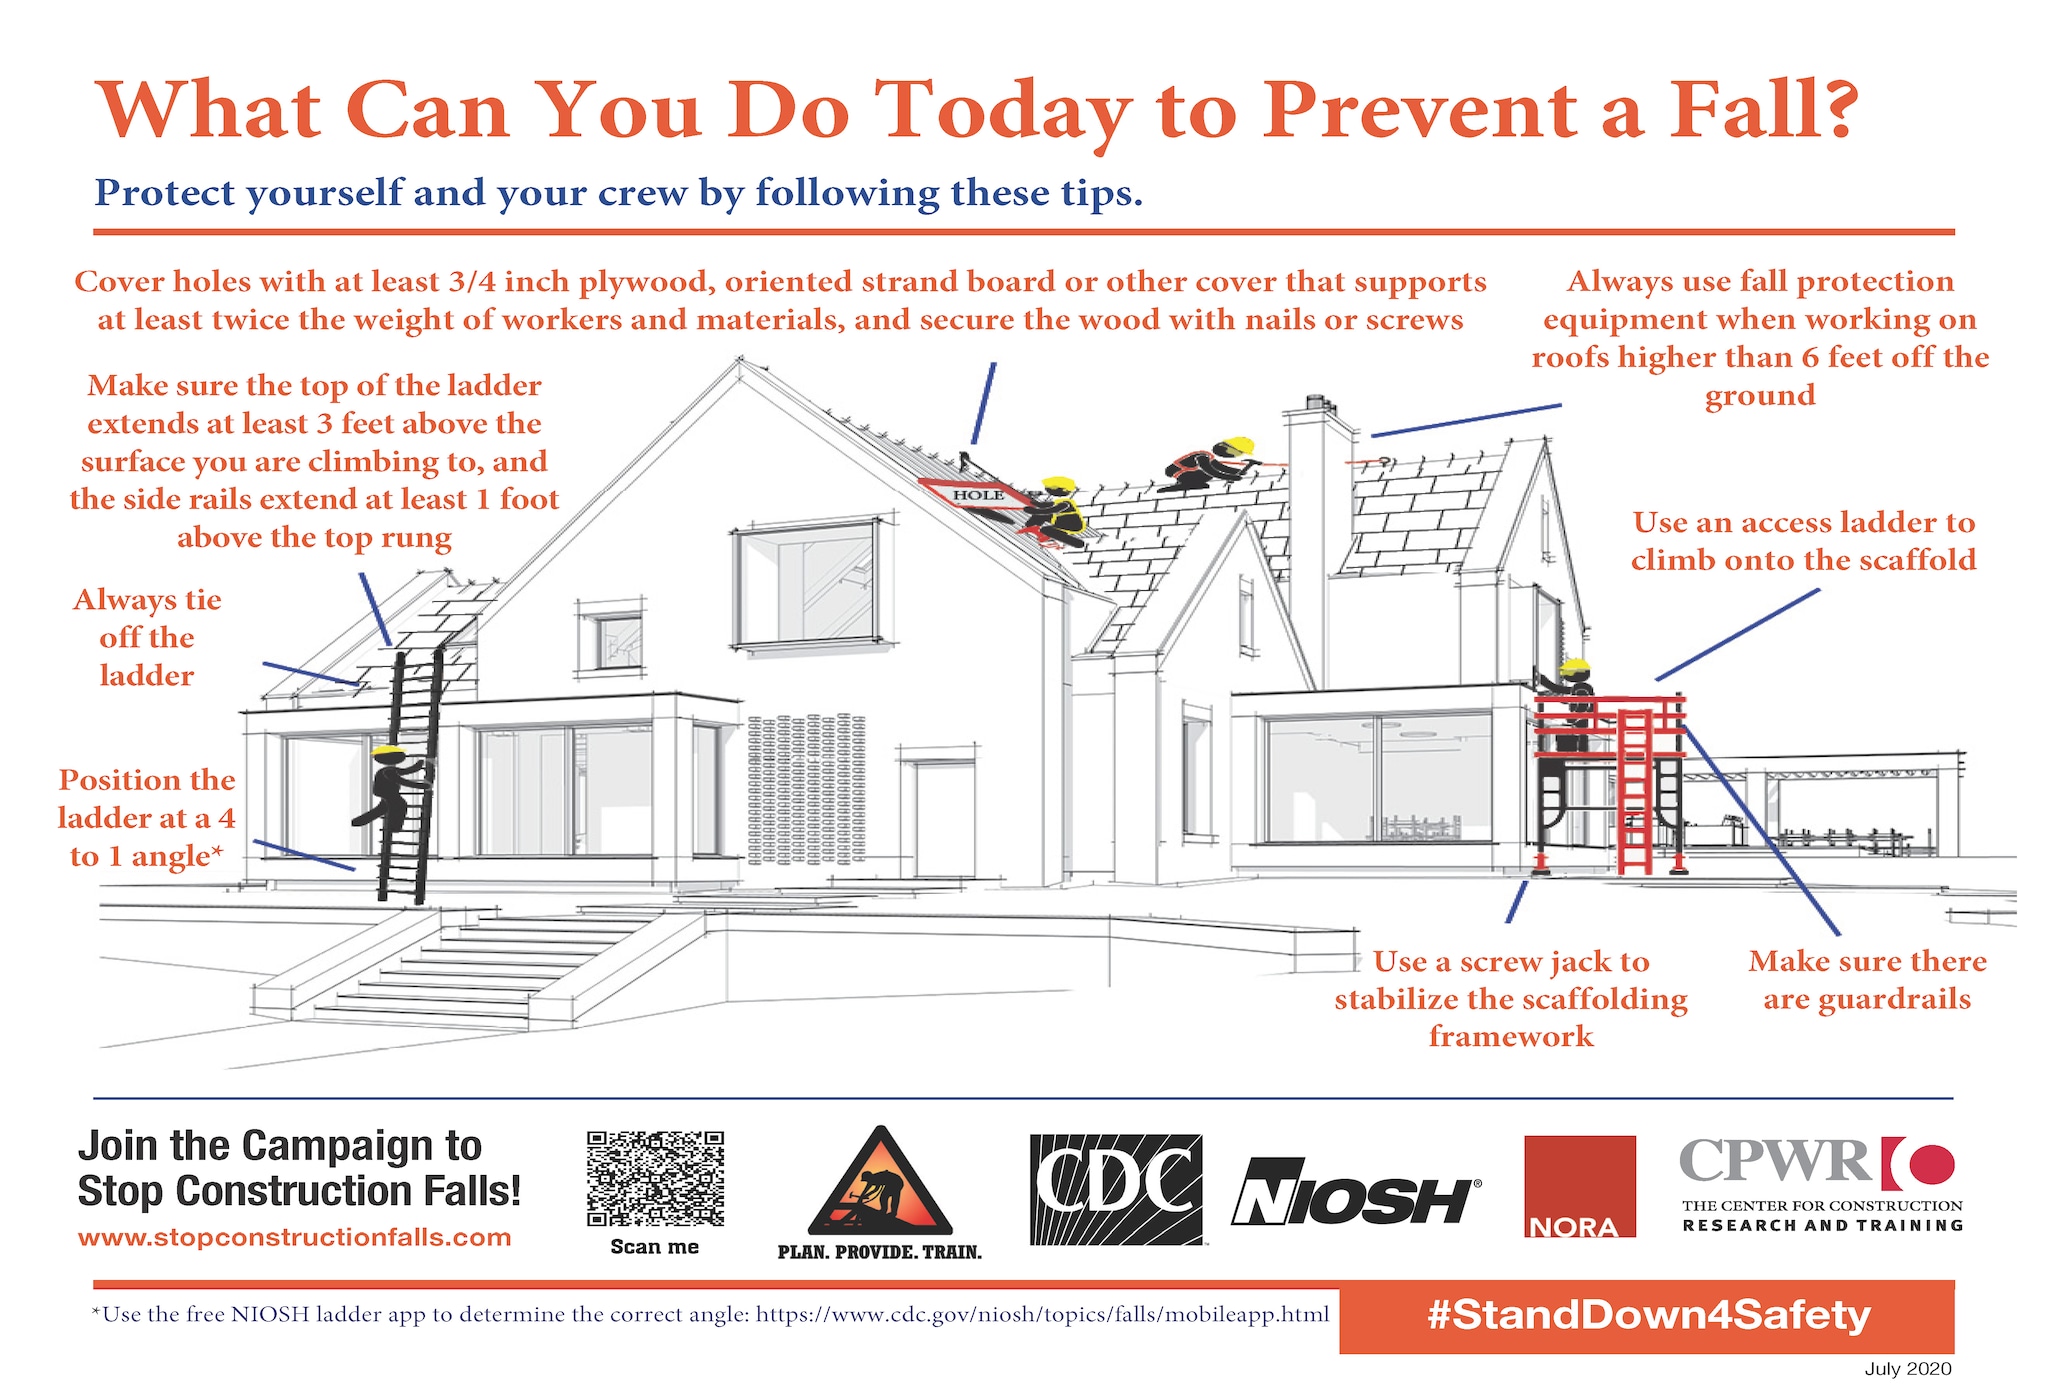 Fall Protection Resource for New Home Construction